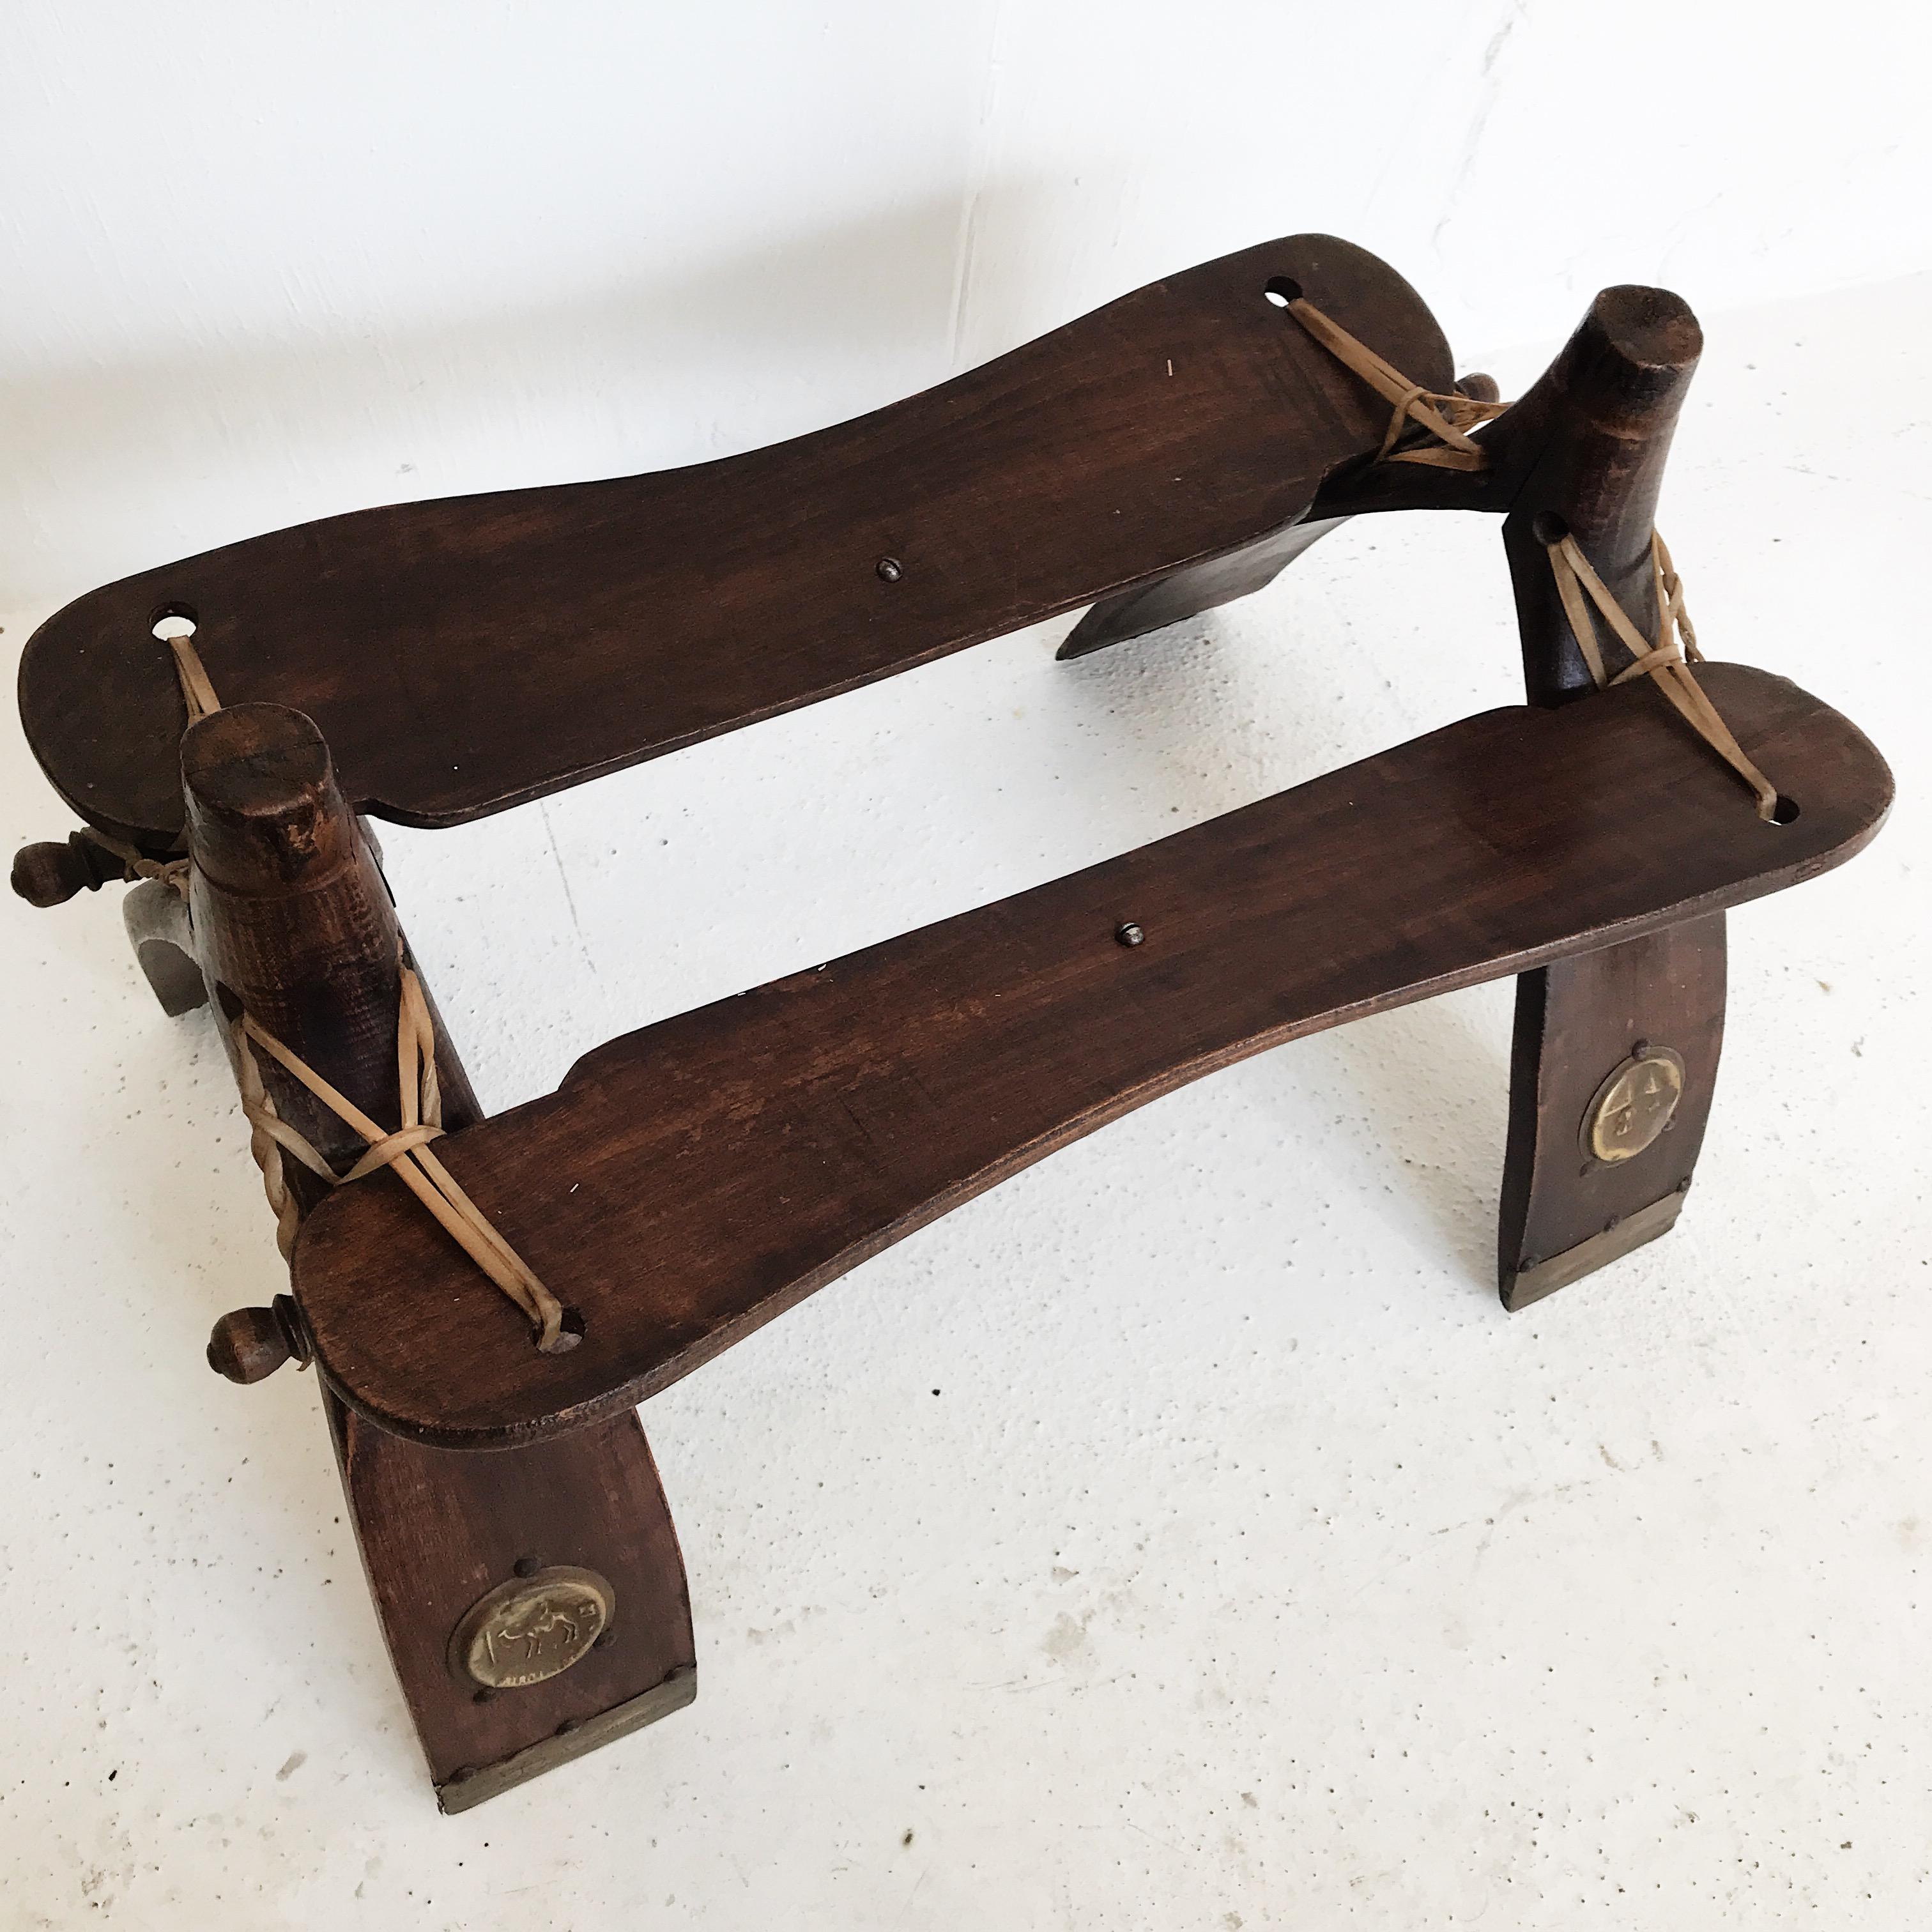 Mid-20th Century Egyptian Wooden Camel Saddle Stool with Original Leather Saddle In Fair Condition For Sale In Ettalong Beach, NSW